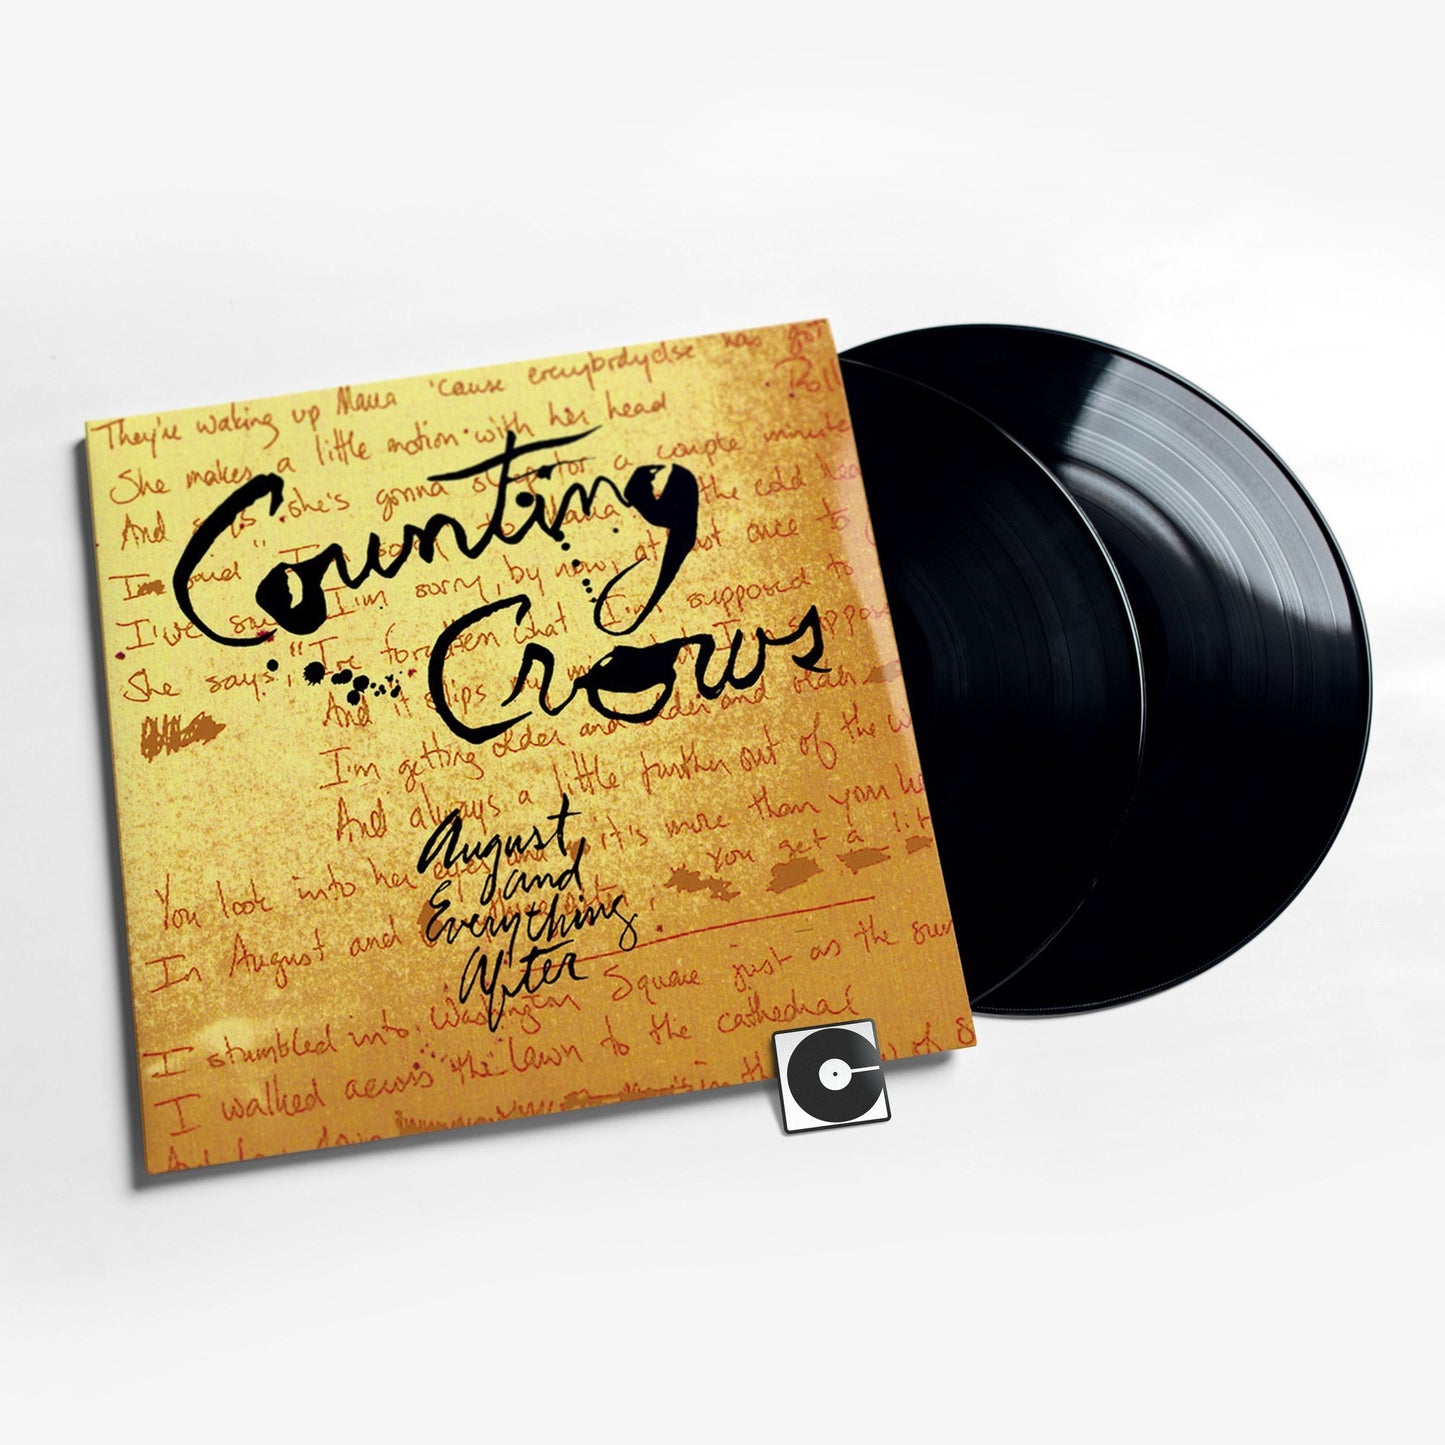 Counting Crows - "August And Everything After" Analogue Productions